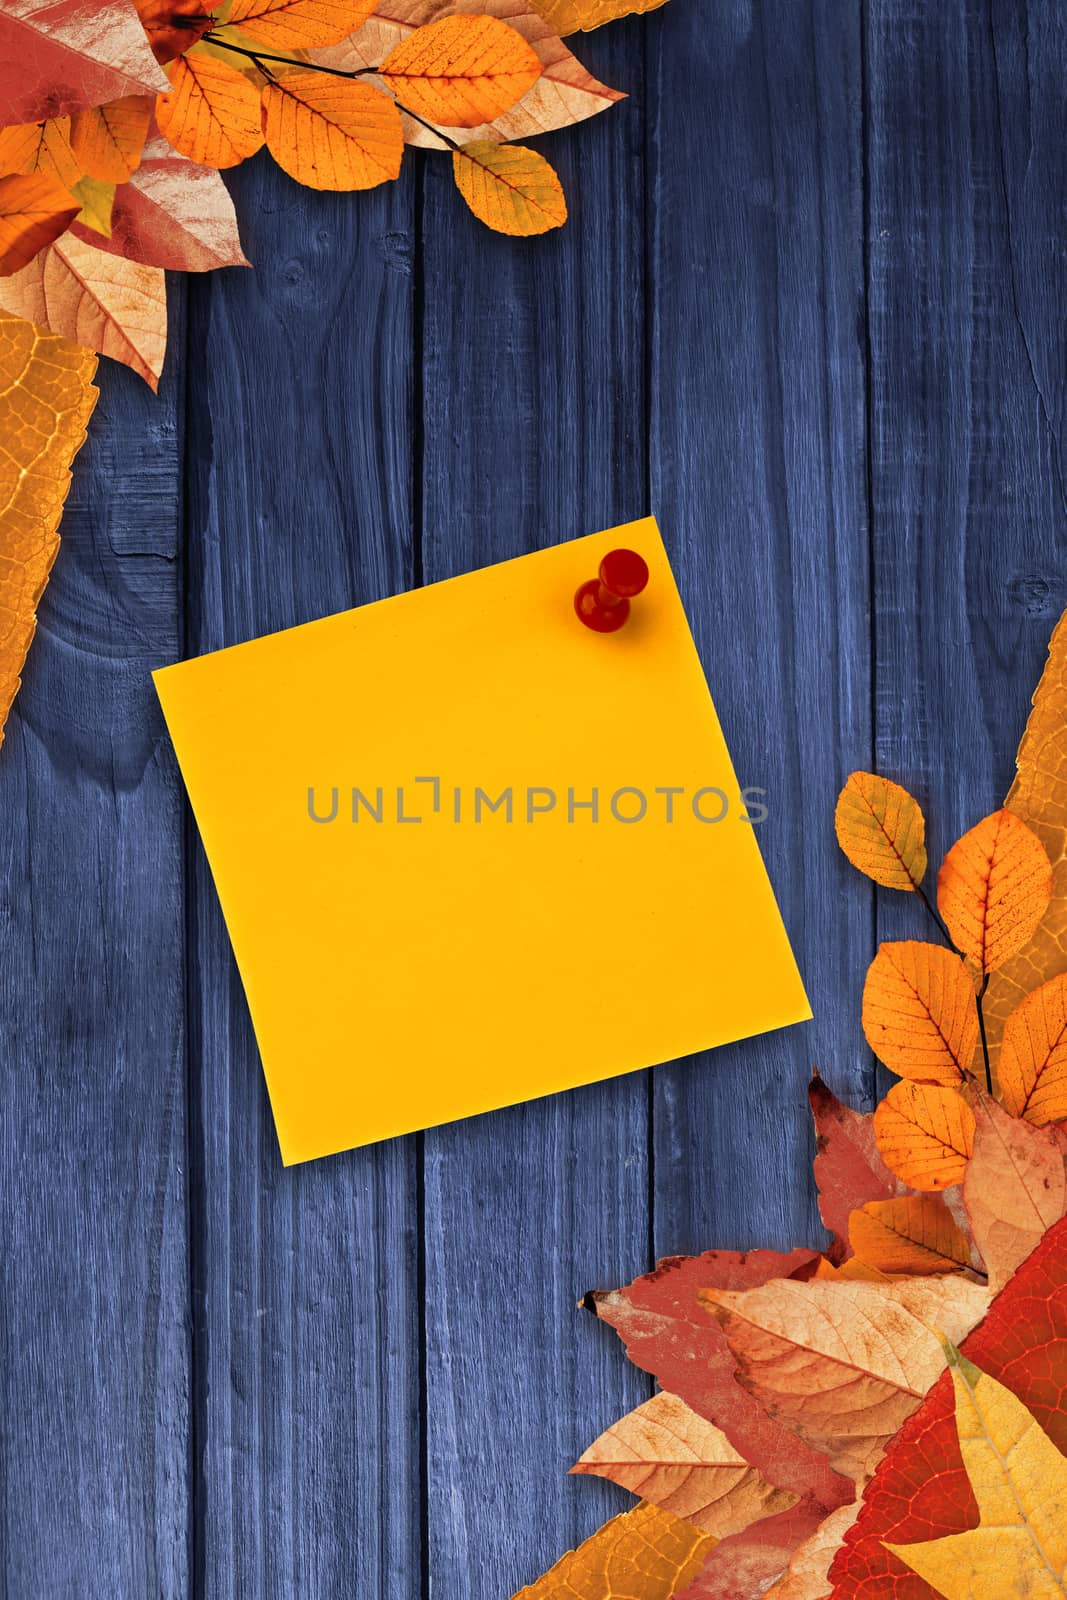 Digital image of pushpin on yellow paper  against autumn leaves on wood